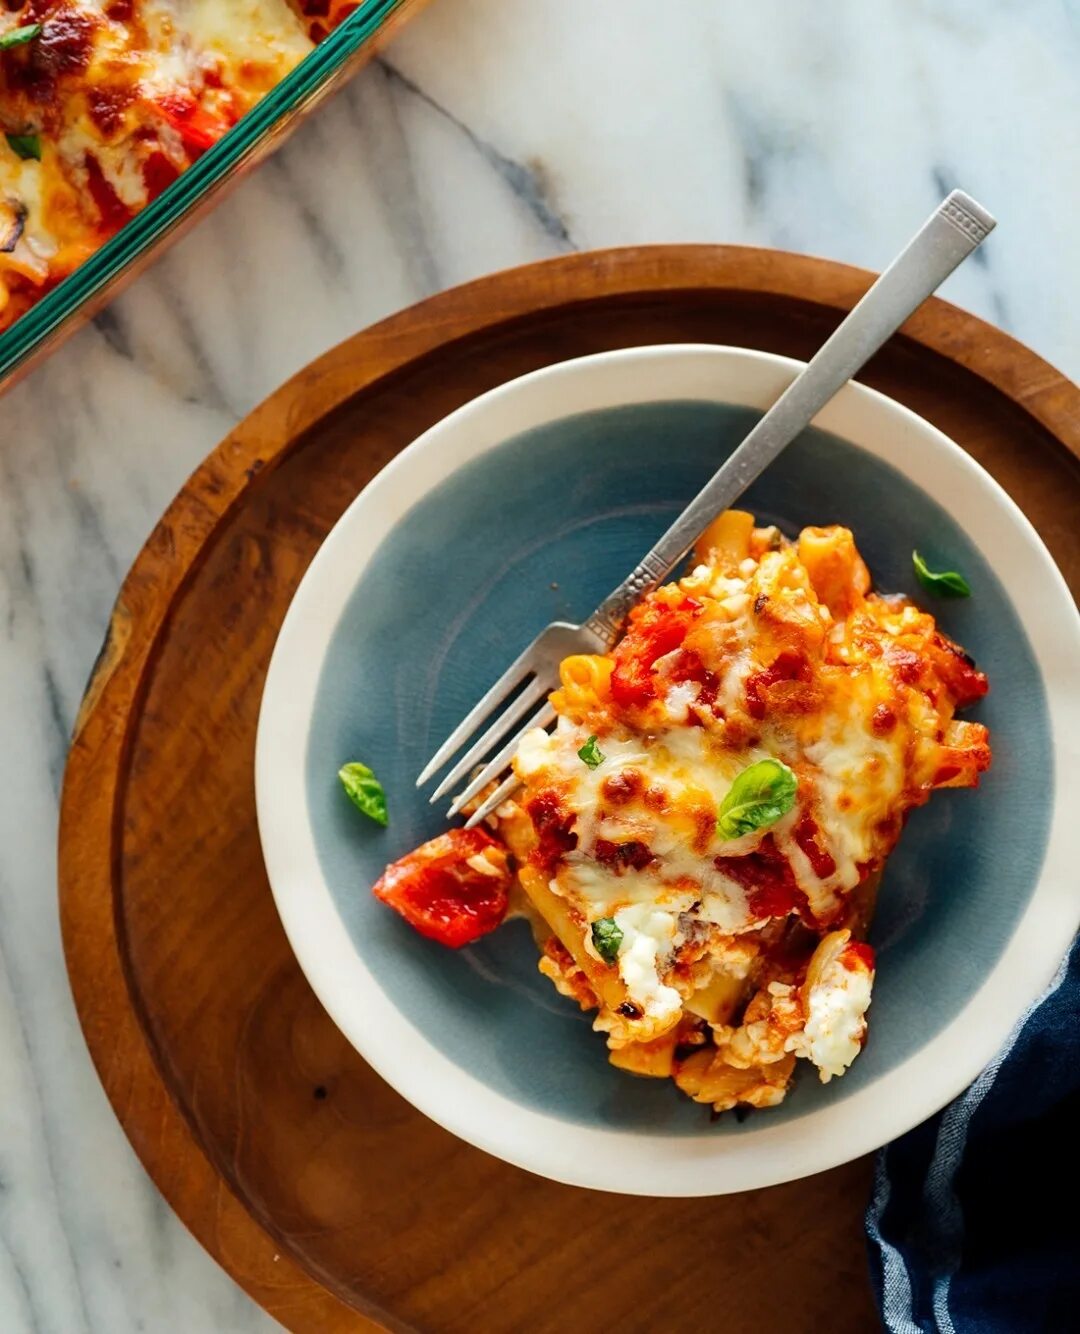 Cookie and Kate в Instagram: "This is the lightened-up baked ziti of m...